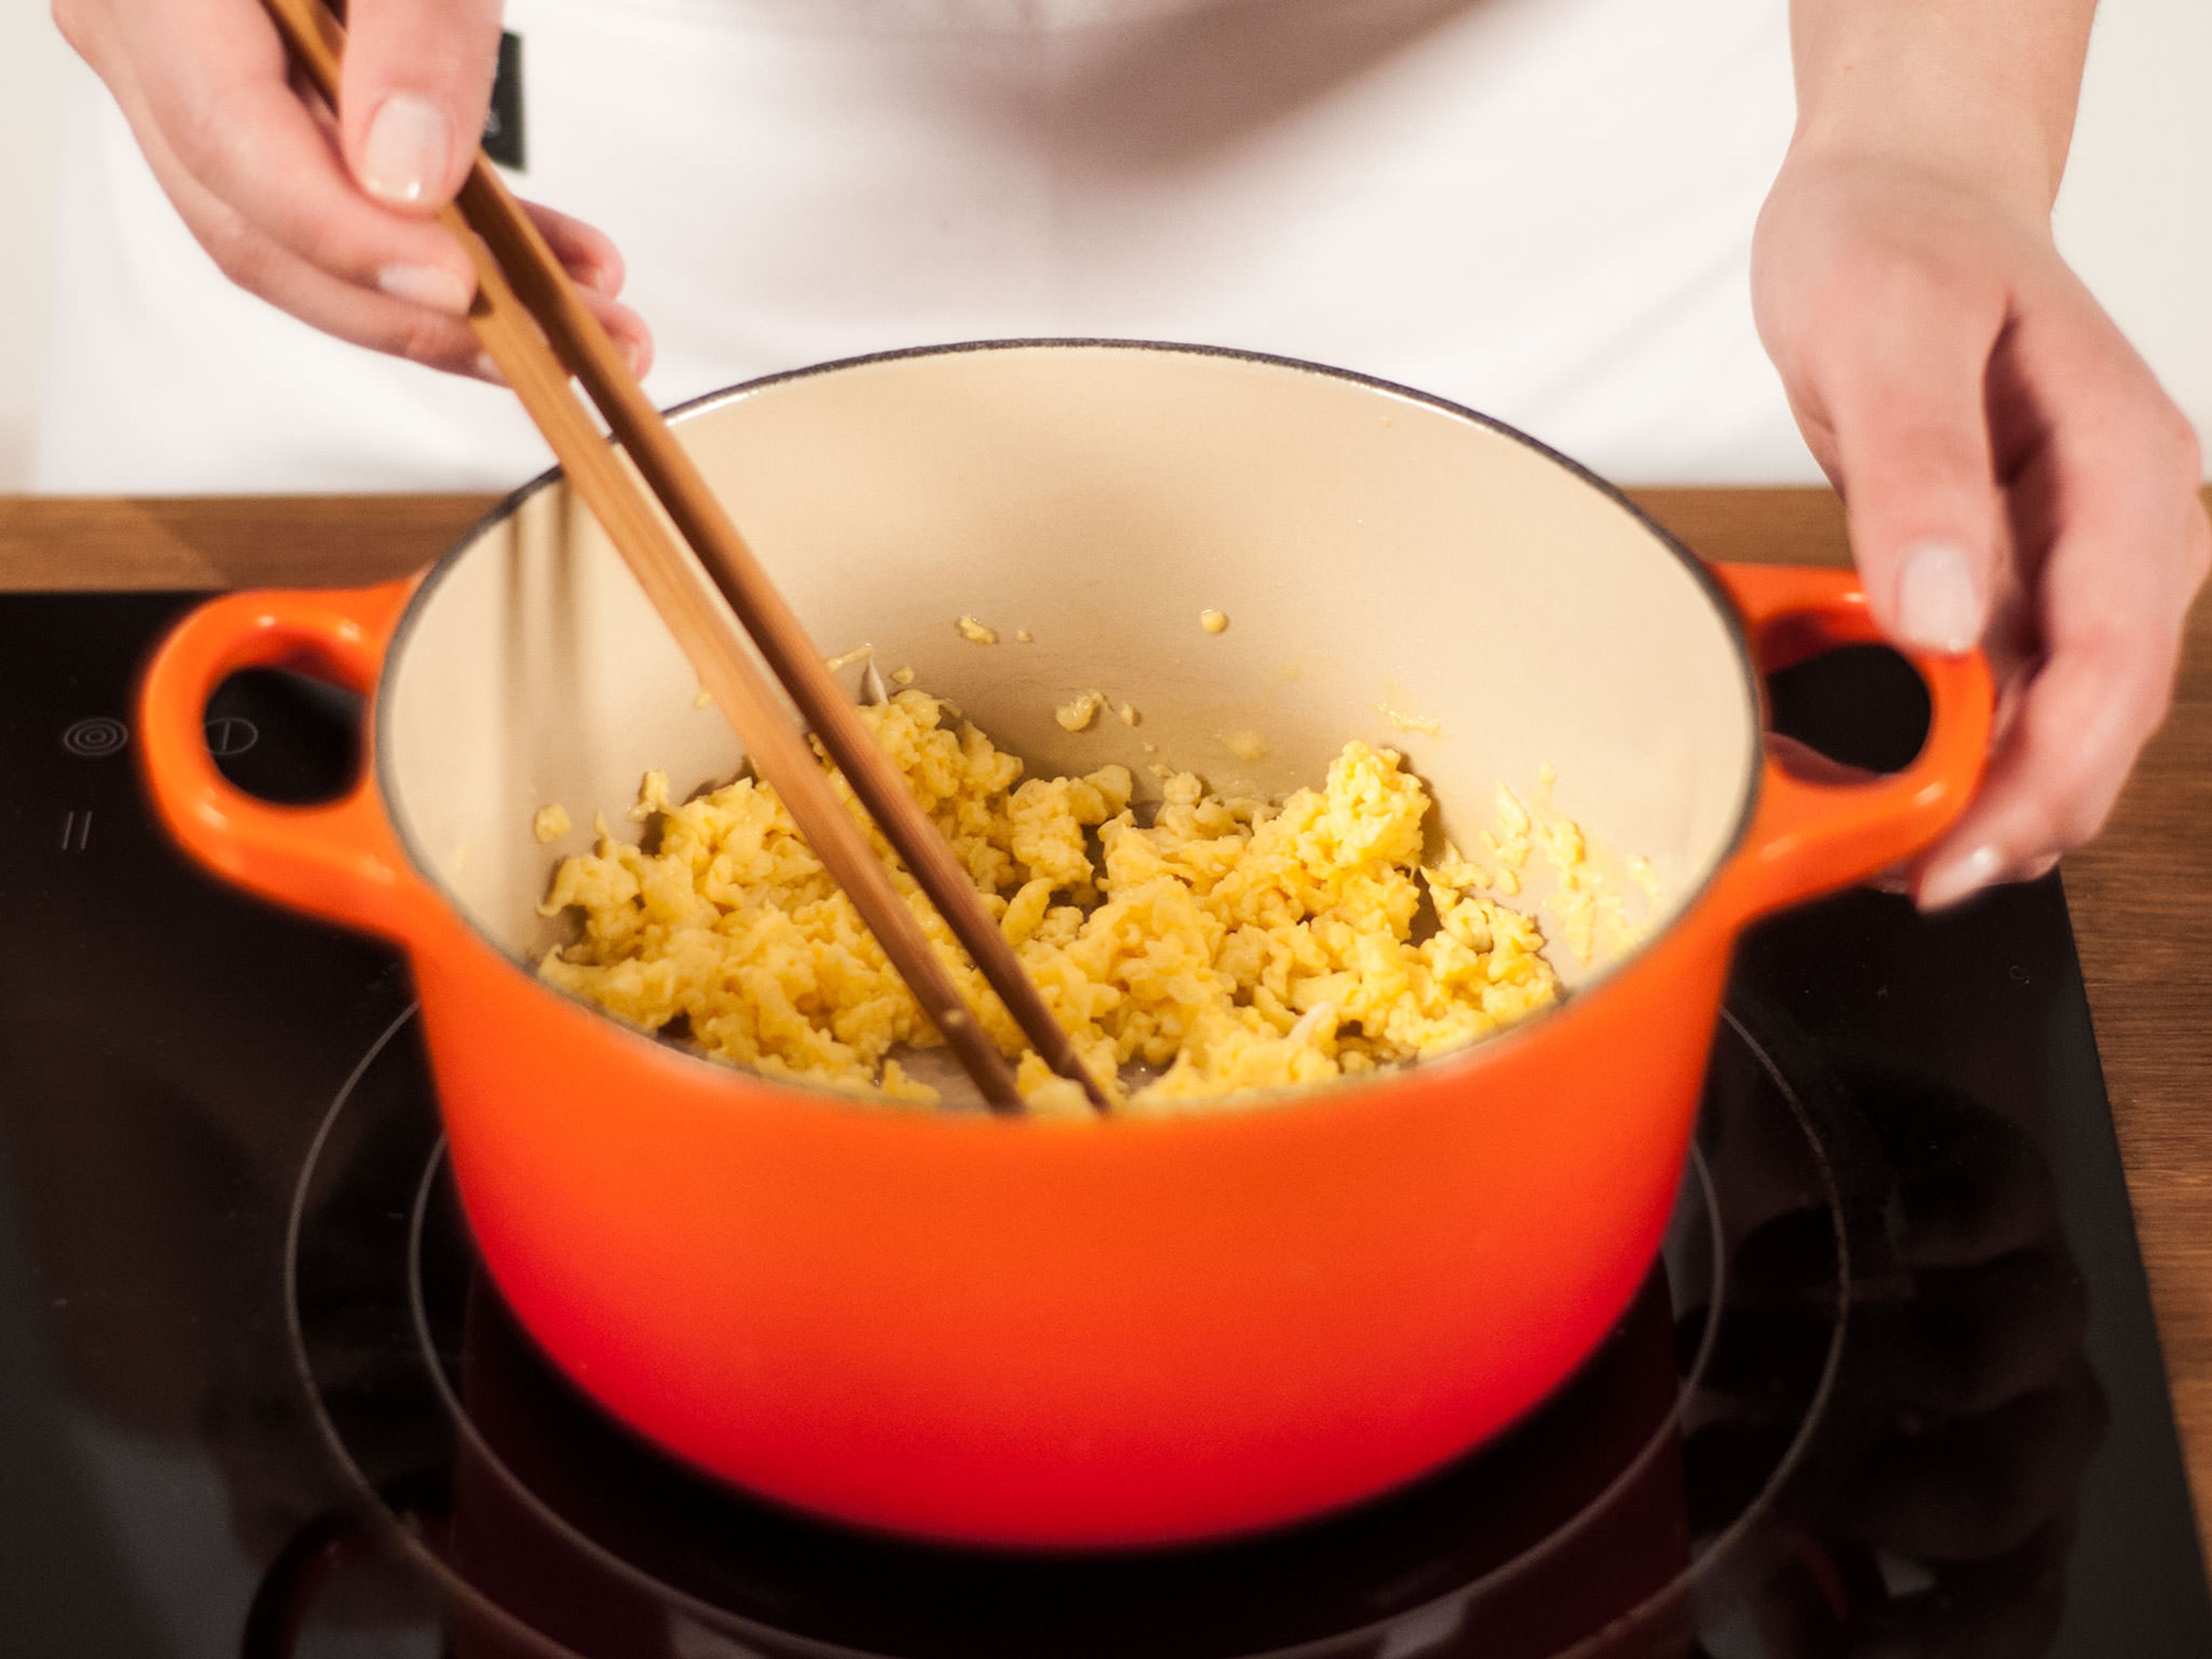 In a small saucepan, heat parts of the vegetable oil over medium-high heat until hot. Add eggs to pan and scramble for approx. 3 – 5 min. until eggs are fluffy and broken down into small pieces. Transfer to a plate and set aside to cool down.